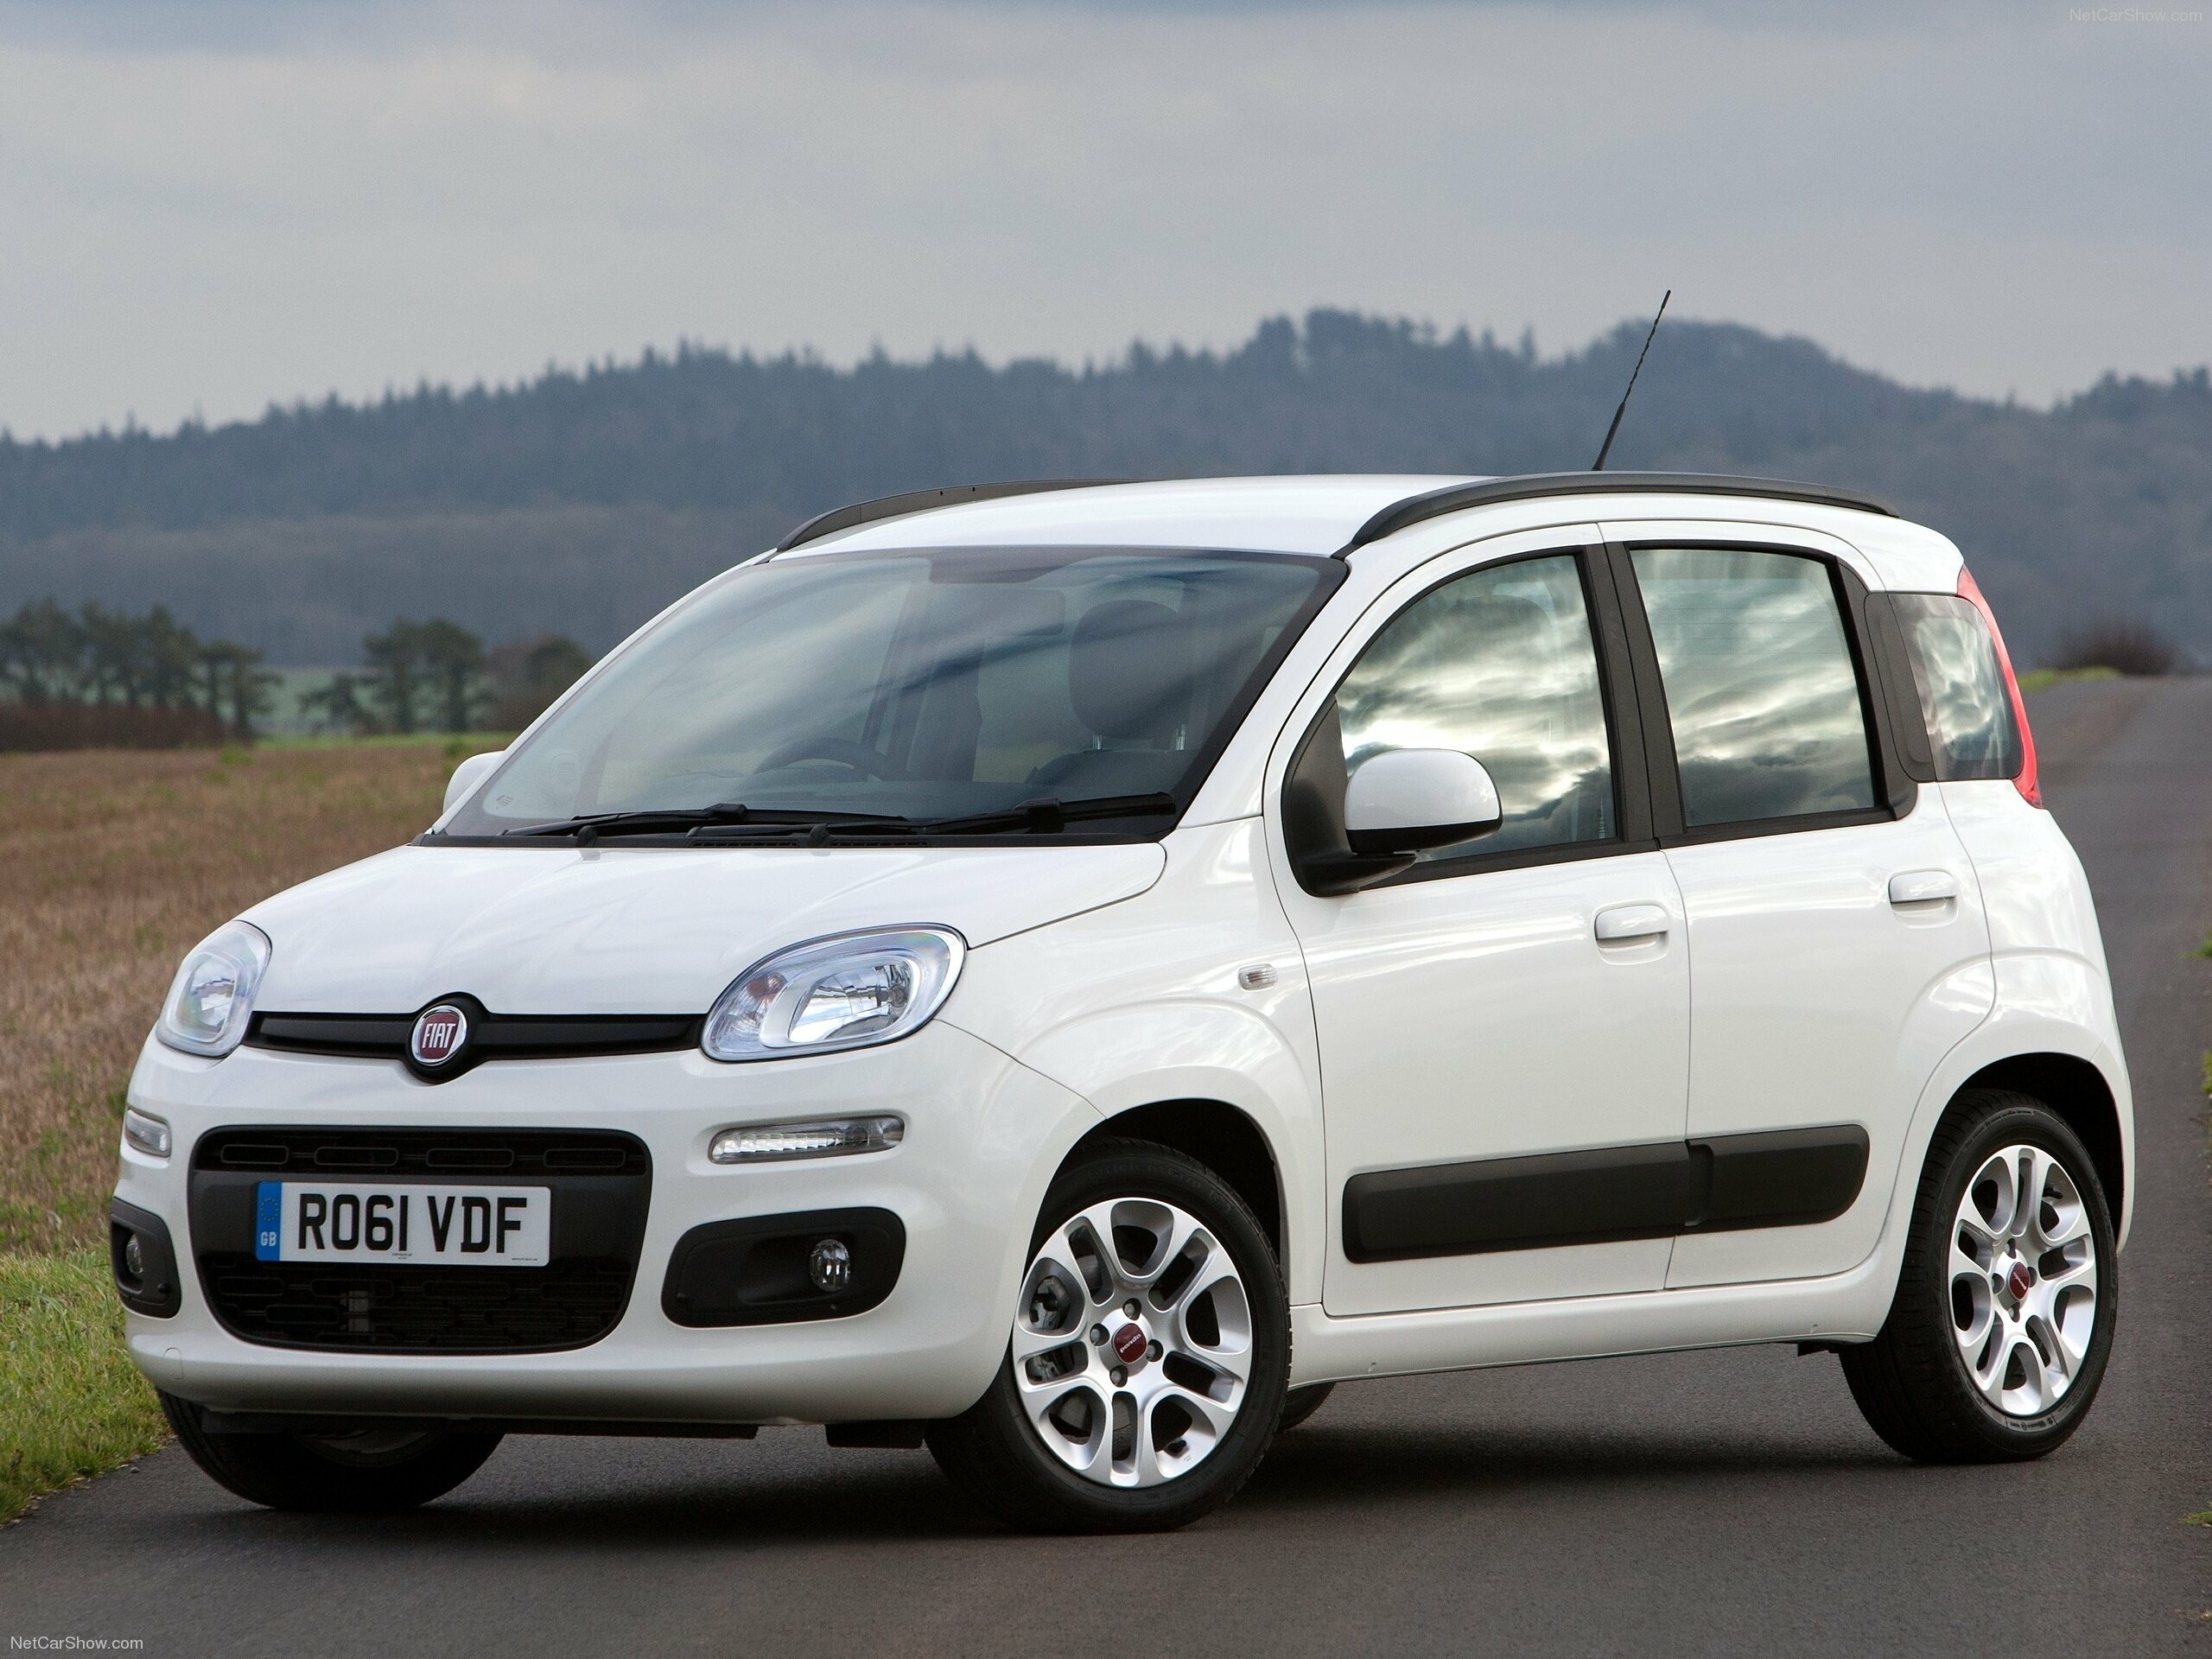 Fiat: Panda, A city car of the Italian company, which is part of the Stellantis association. 2560x1920 HD Wallpaper.